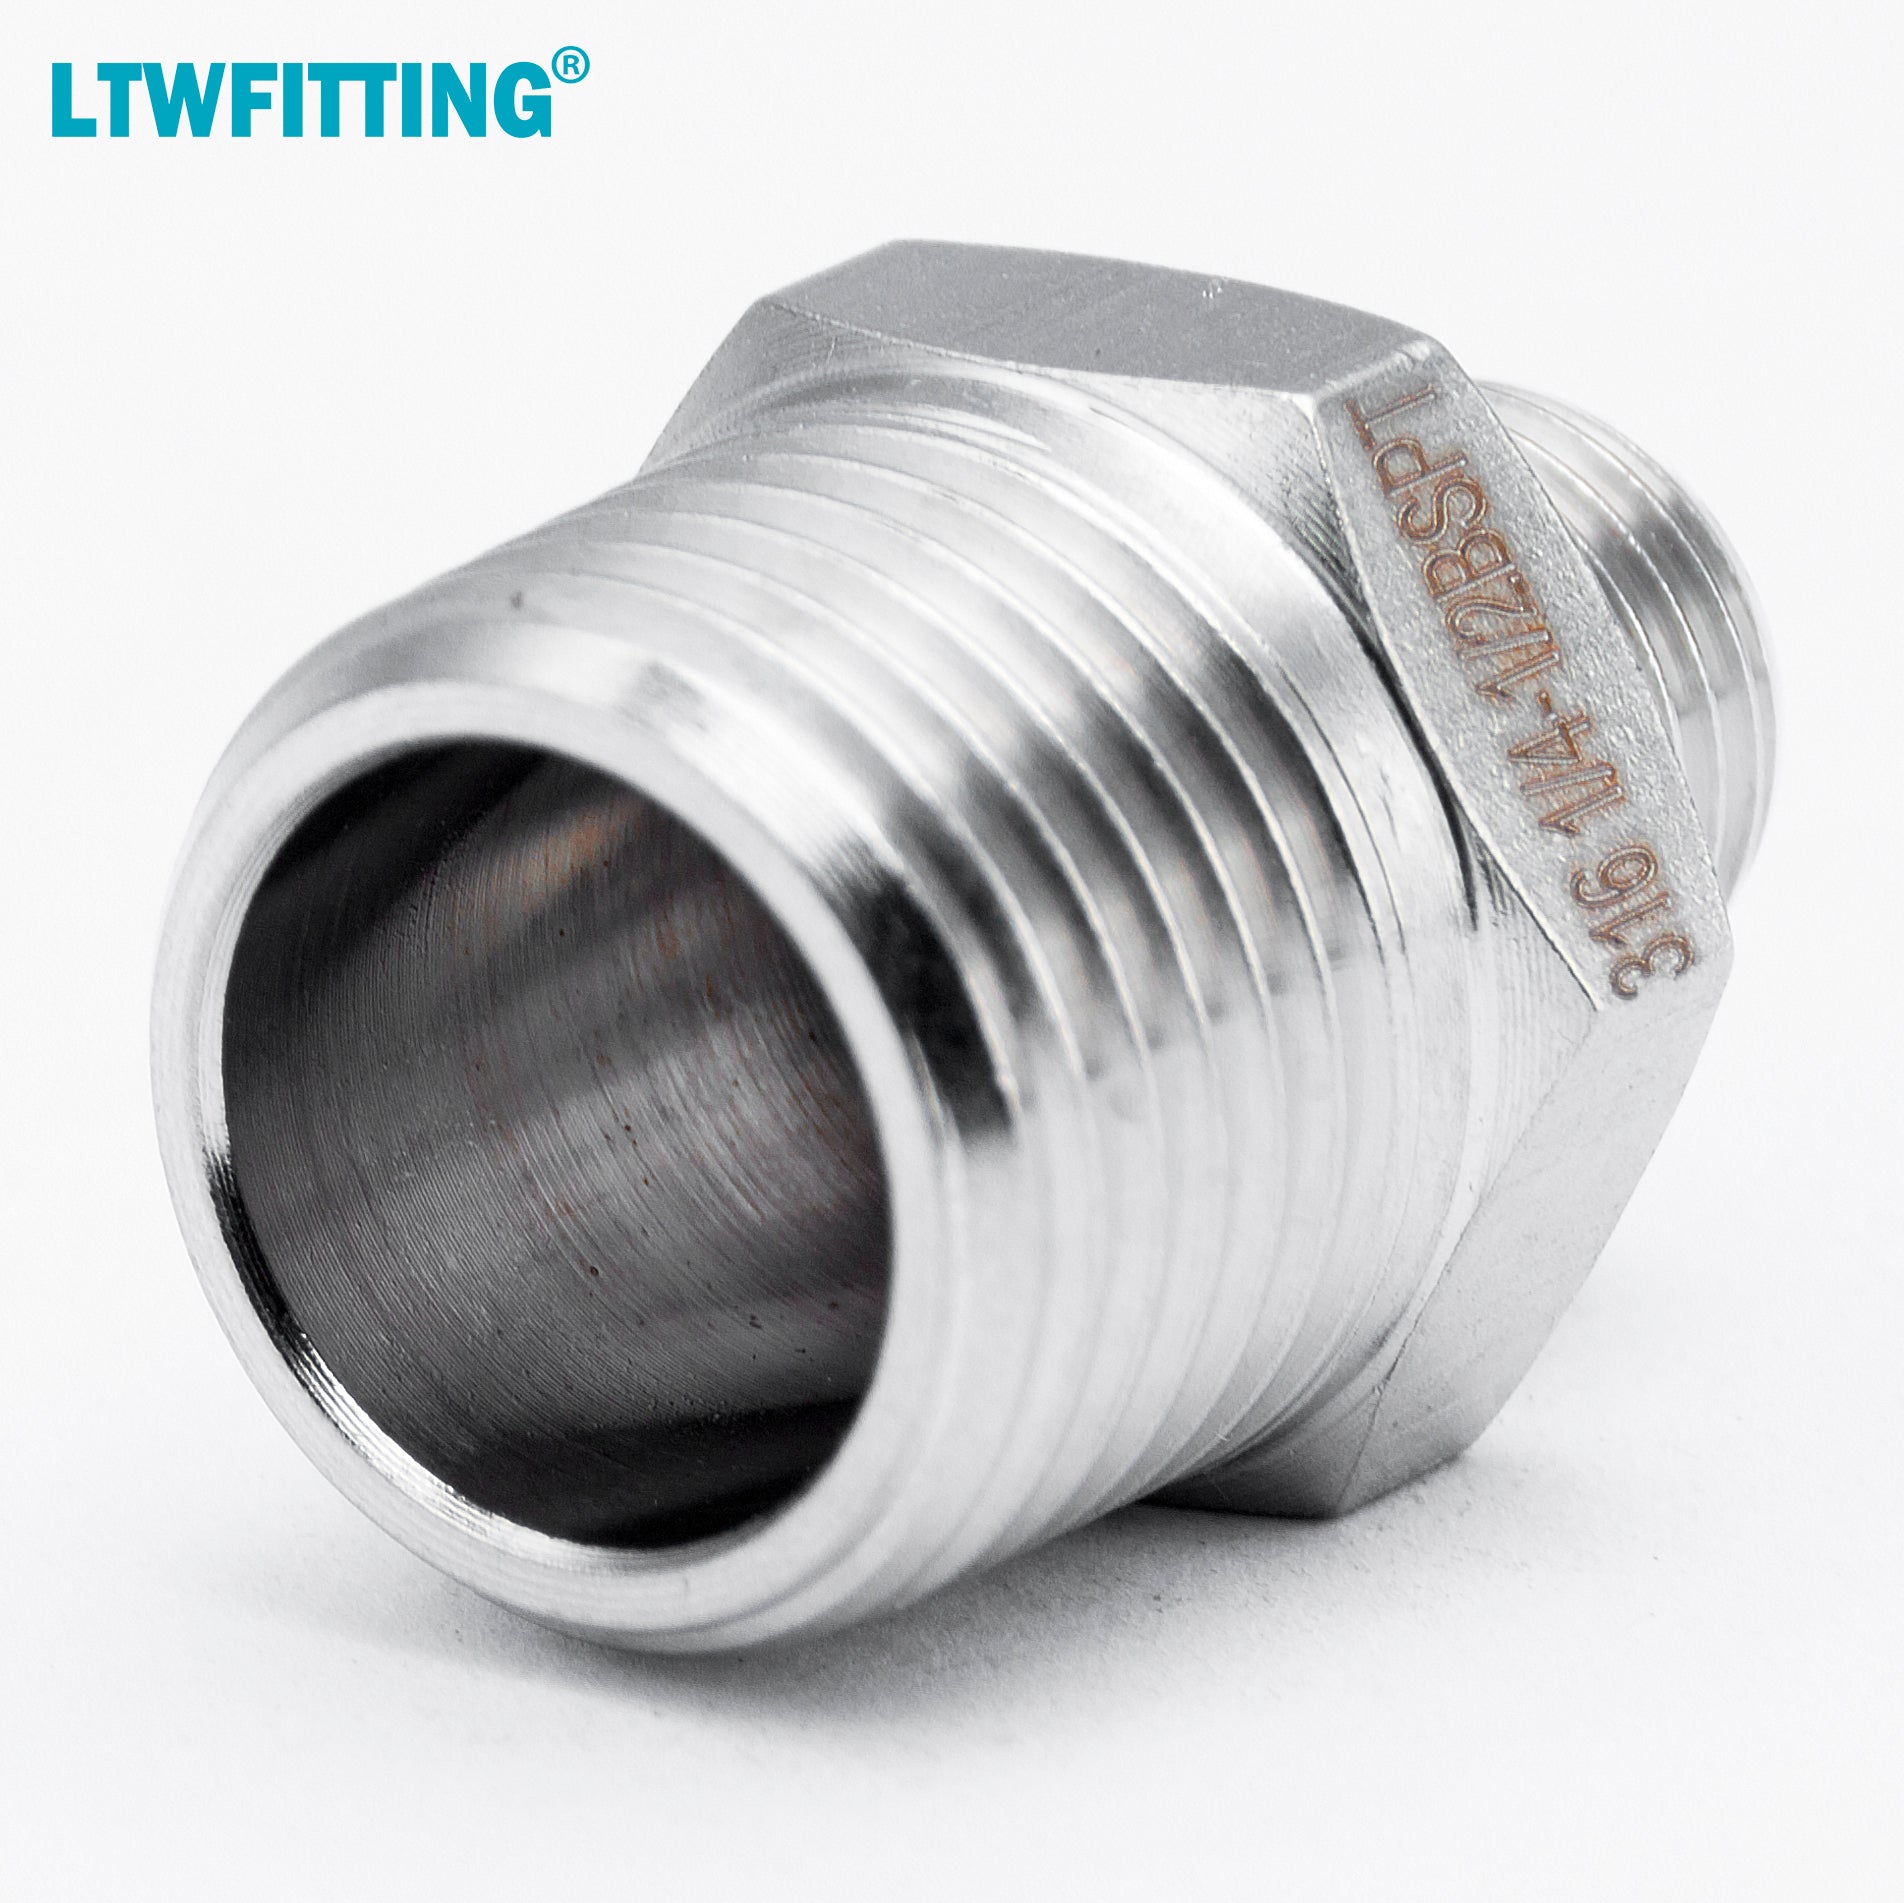 LTWFITTING Stainless Steel 316 Pipe Hex Reducing Nipple Fitting 1/2-Inch x 1/4-Inch Male BSPT (Pack of 5)